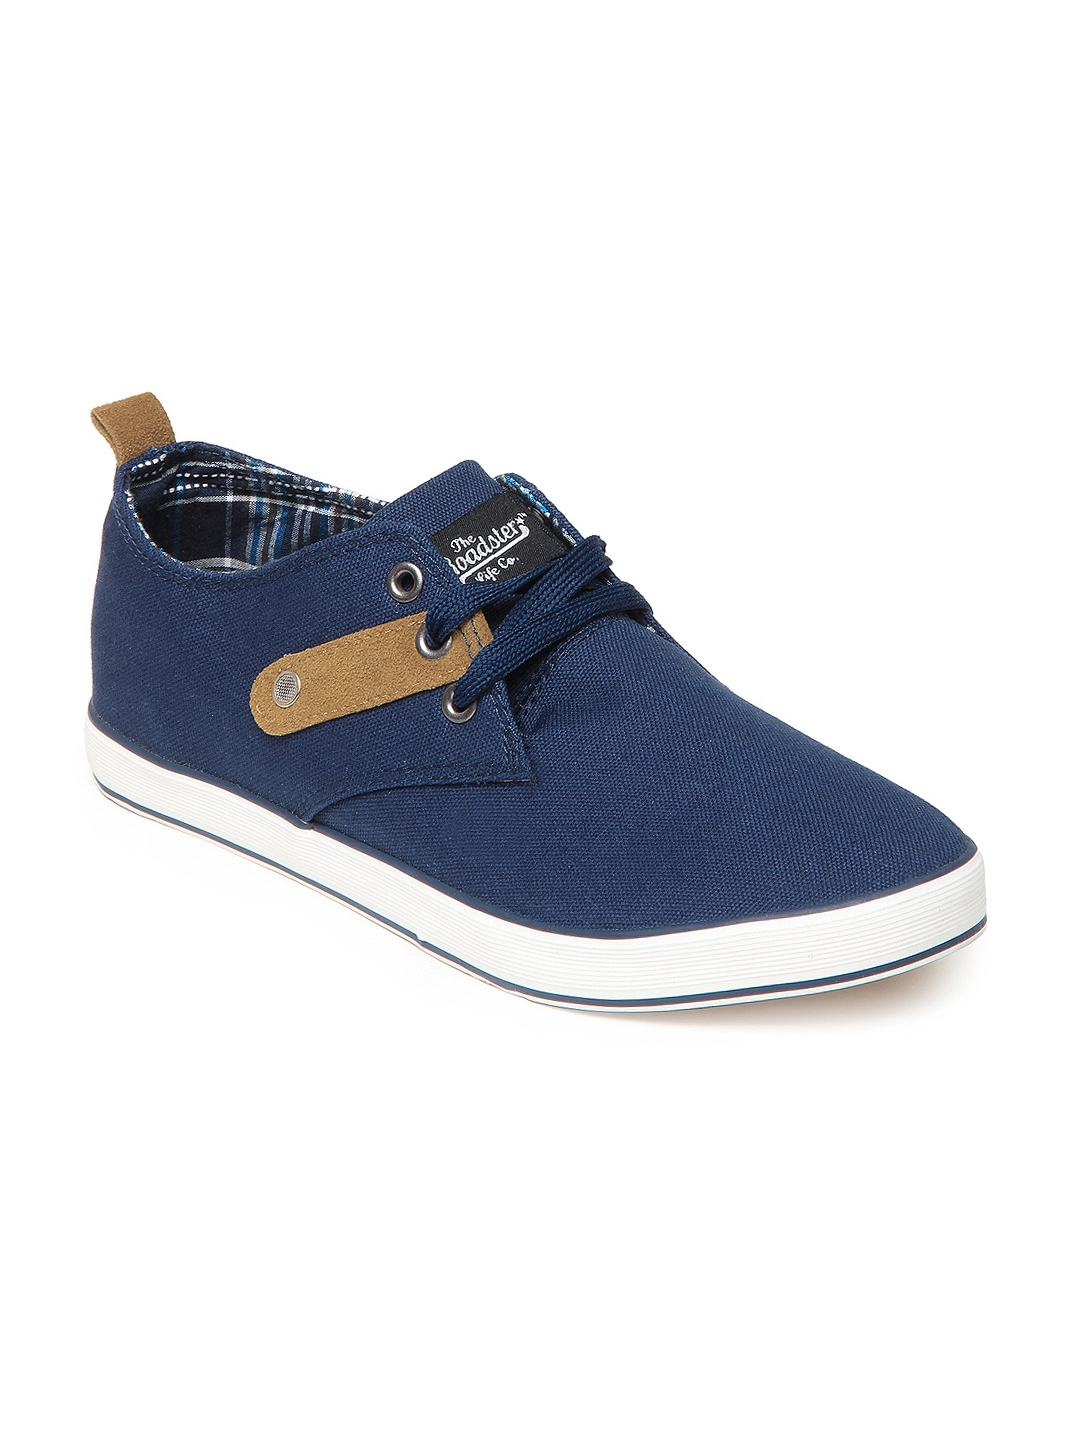 Buy Roadster Men Blue Canvas Shoes - Casual Shoes for Men 168626 | Myntra